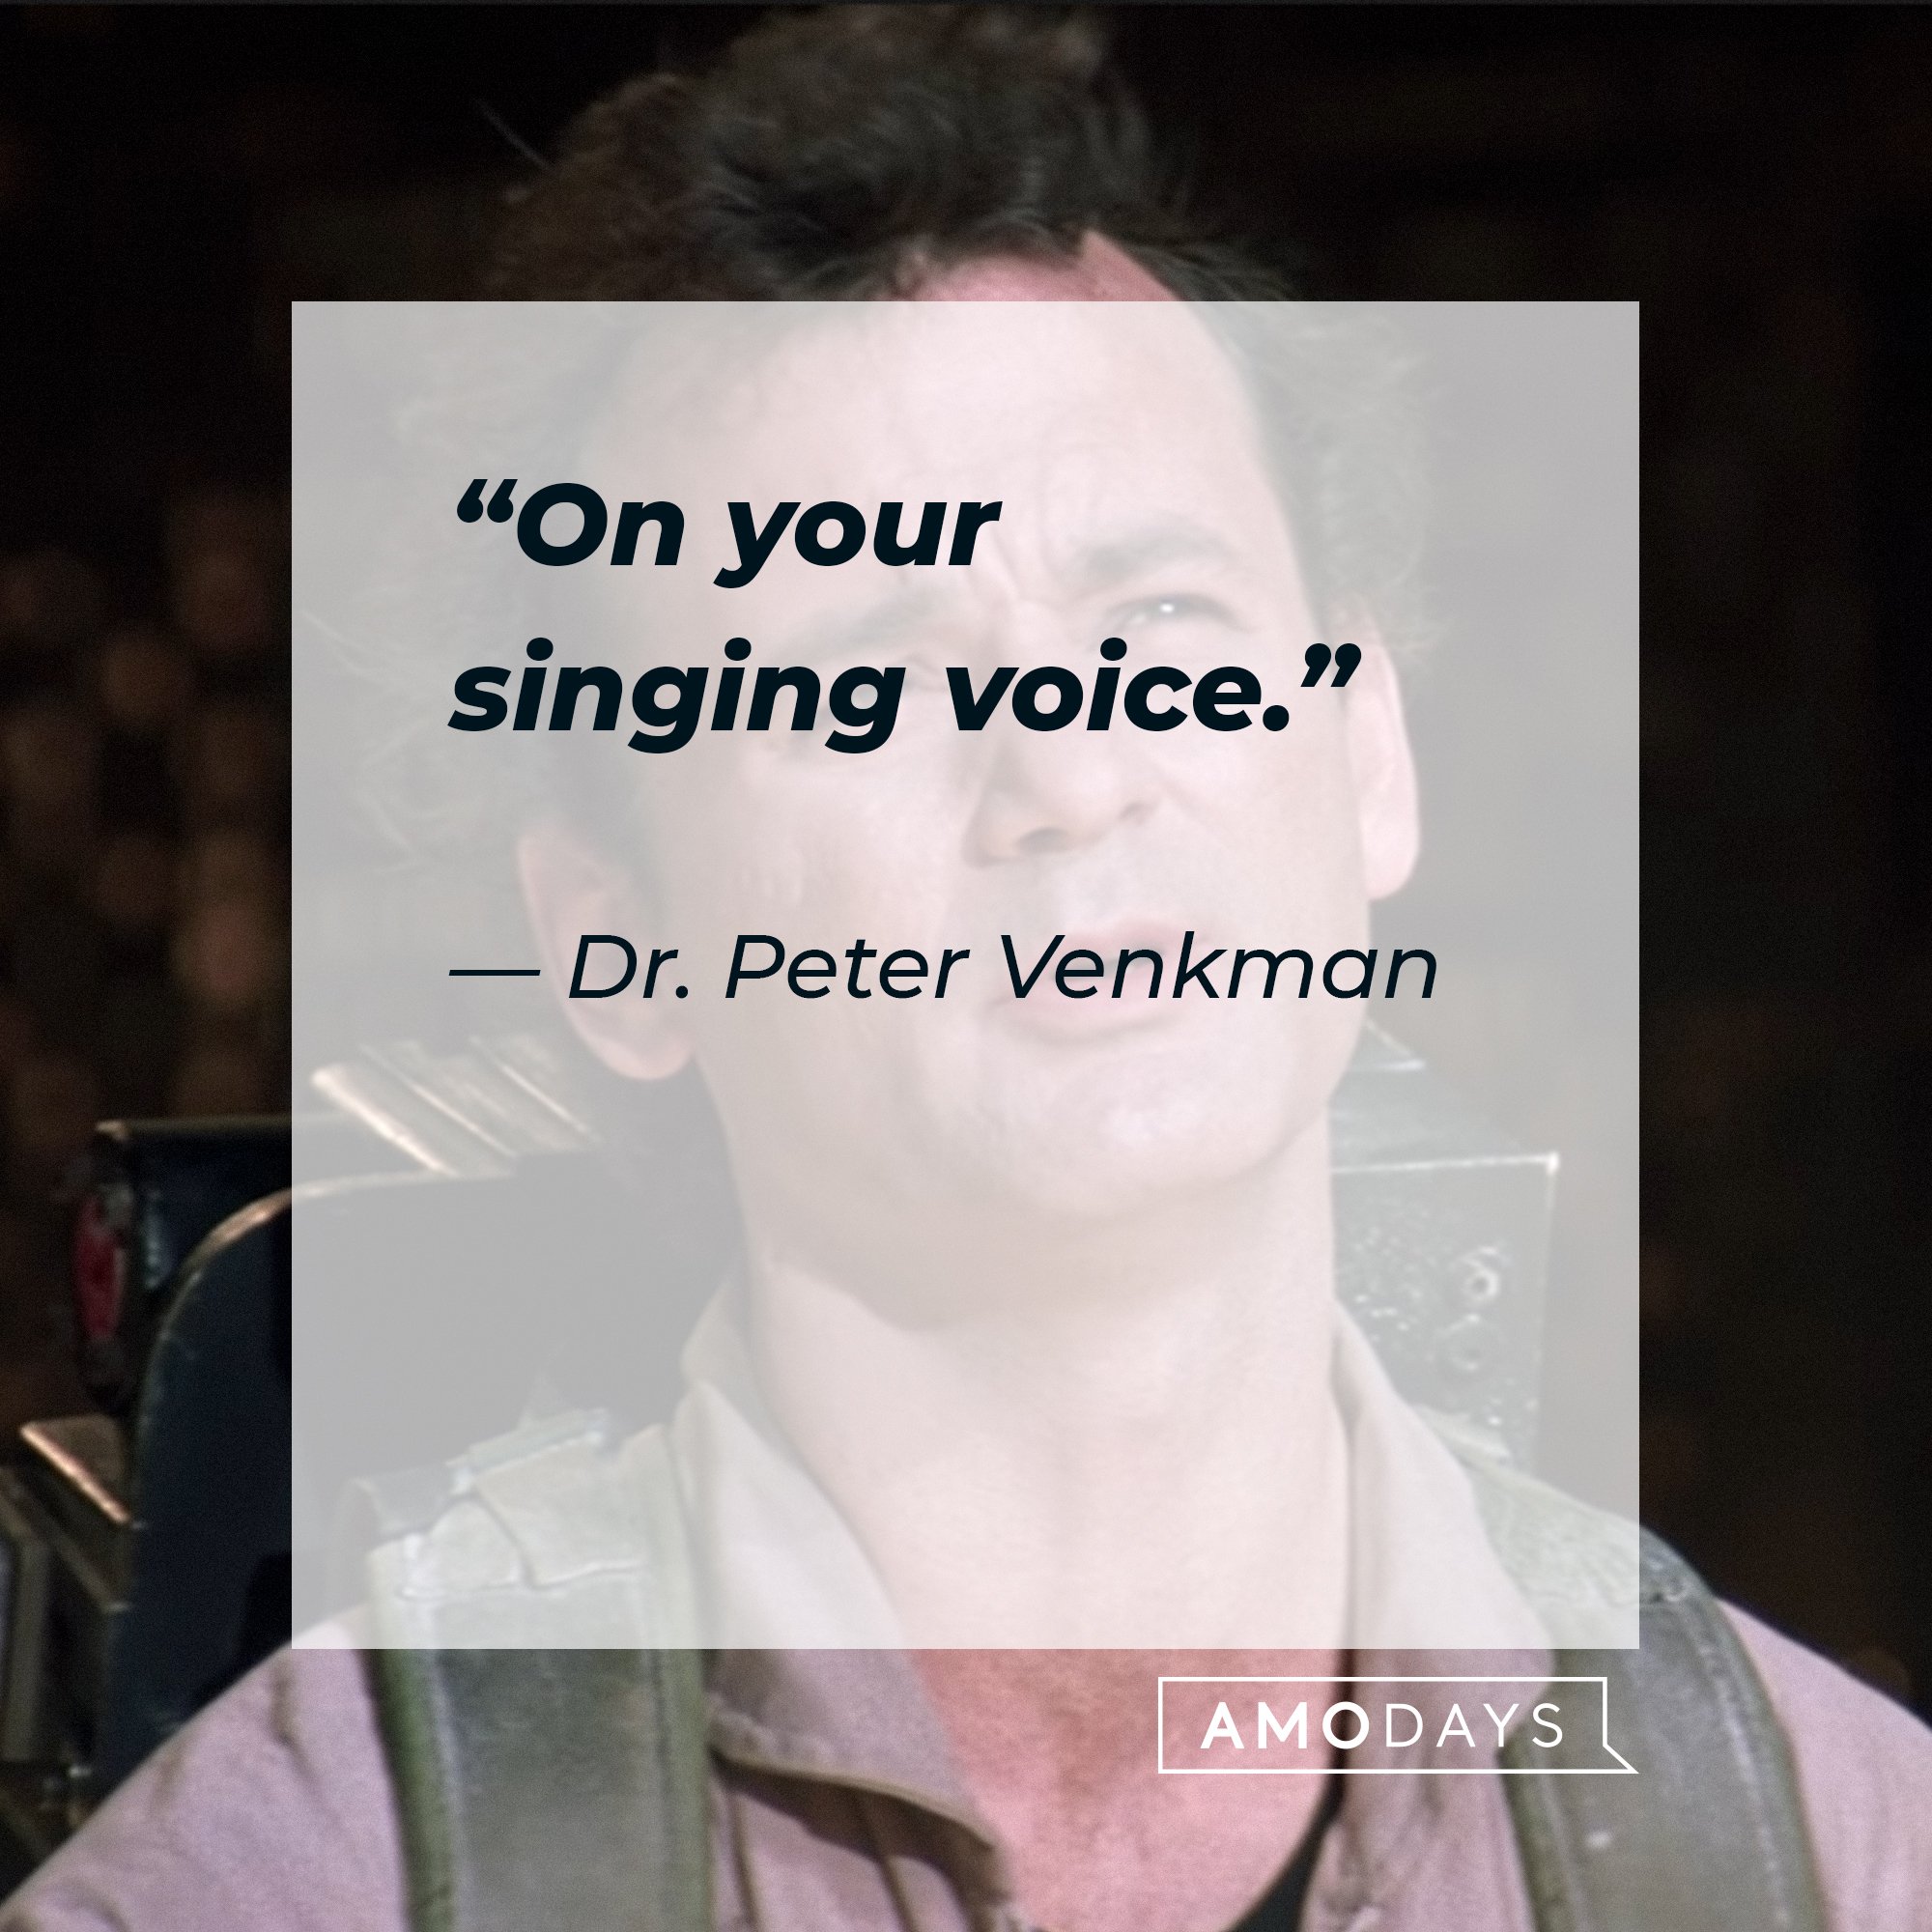 Dr. Peter Venkman's quote: “On your singing voice.” | Image:AmoDays